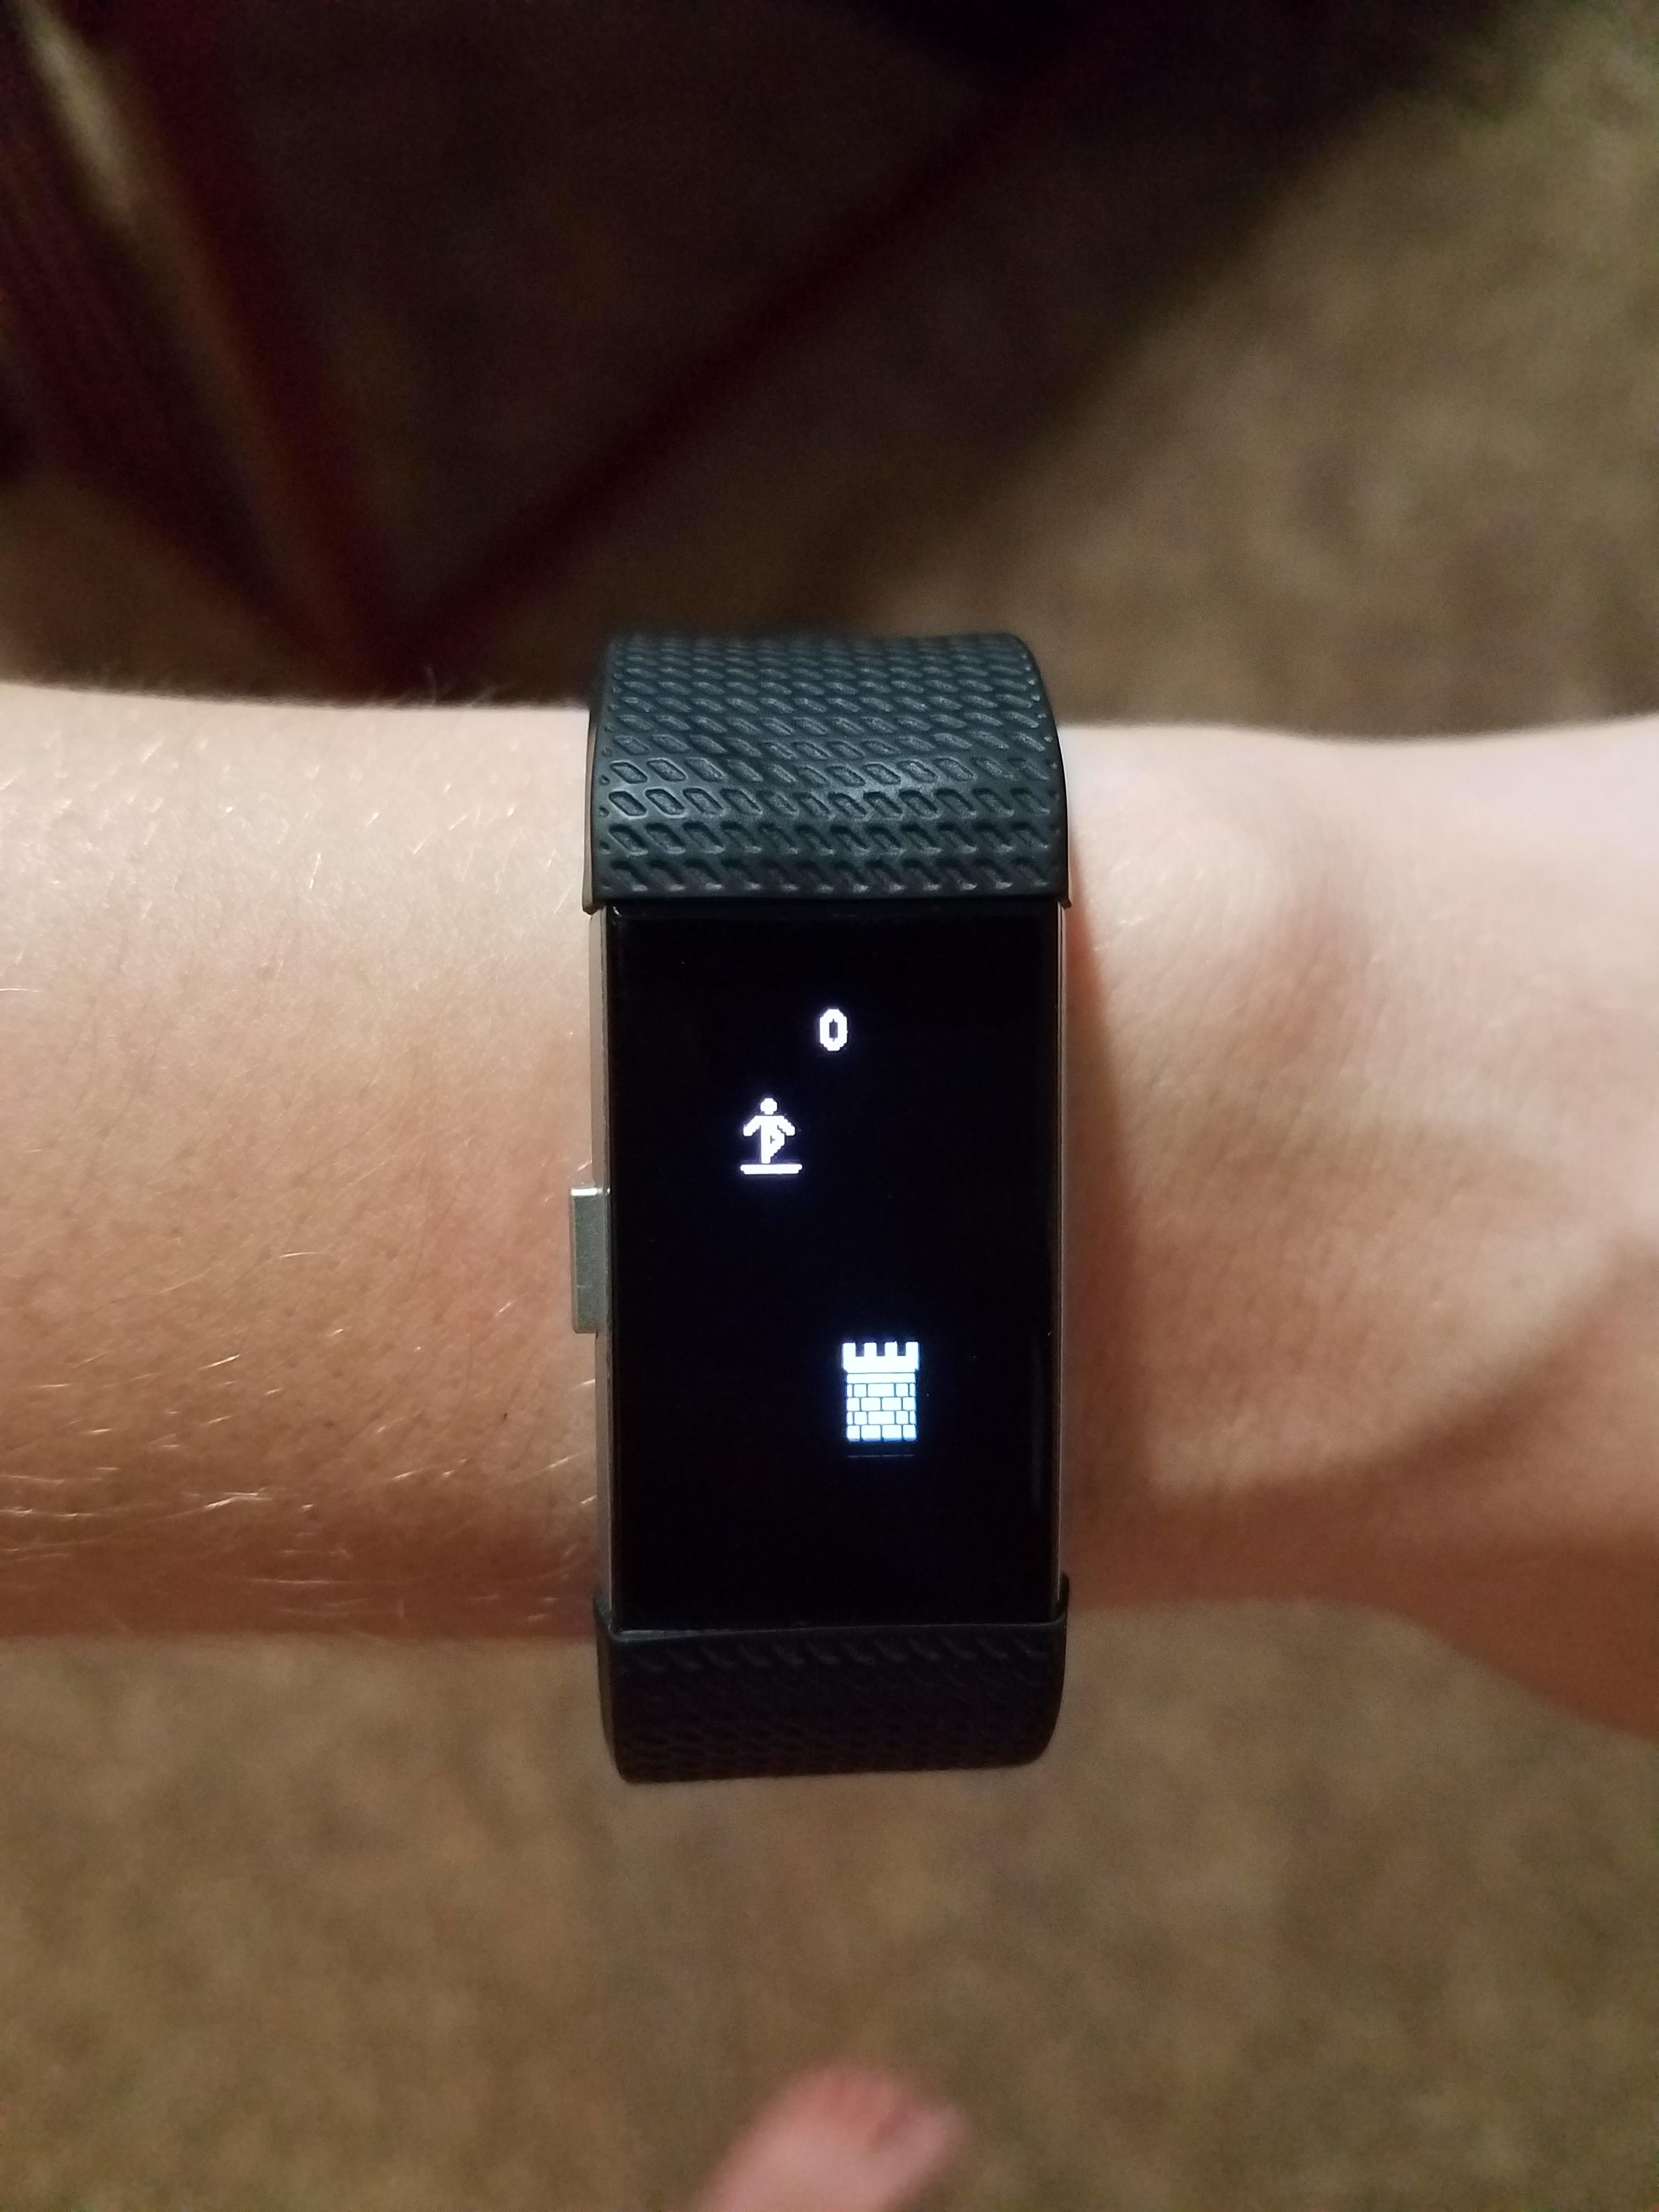 fitbit with games